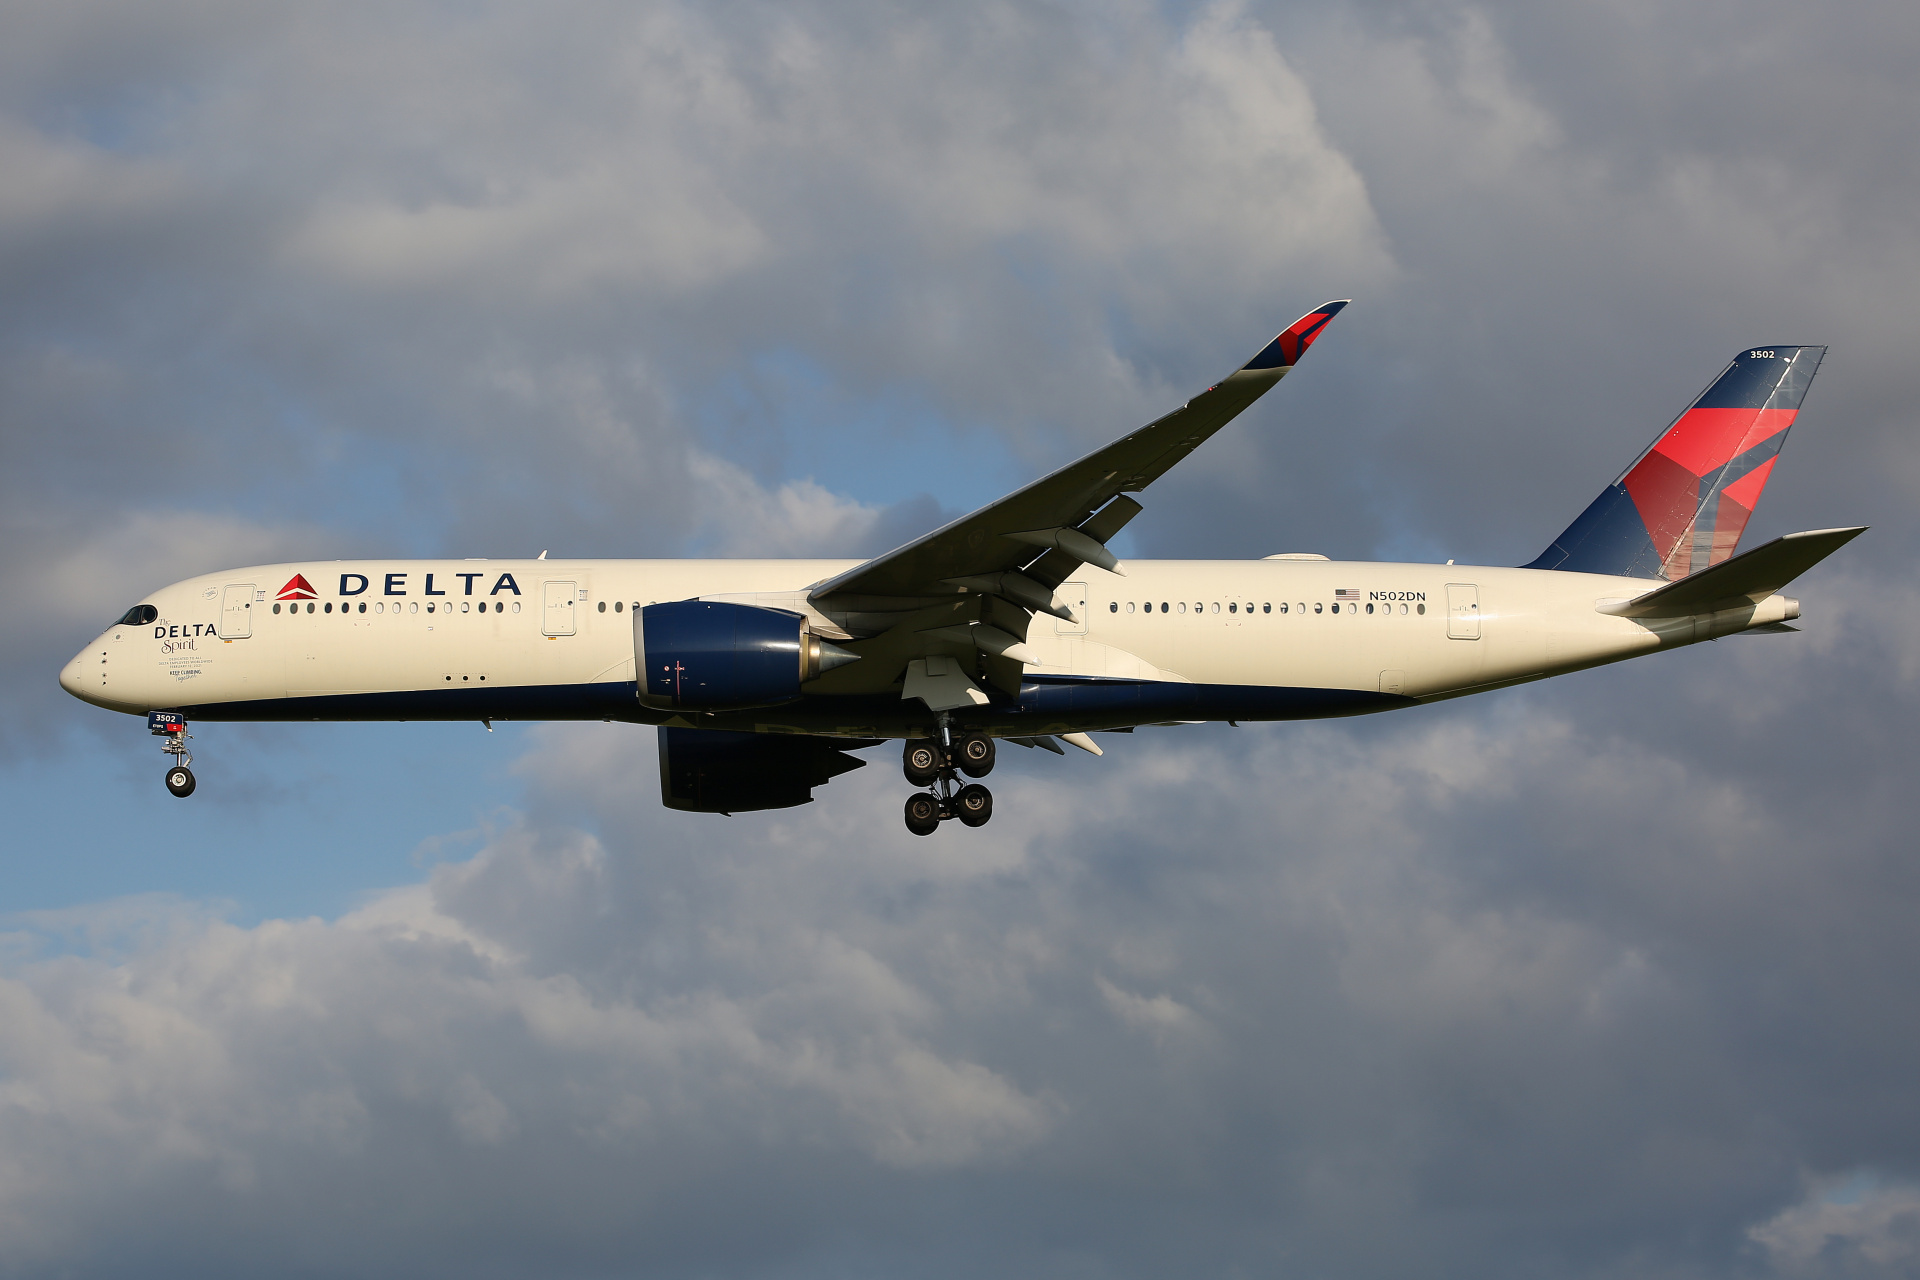 N502DN (The Delta Spirit sticker) (Aircraft » Schiphol Spotting » Airbus A350-900 » Delta Airlines)